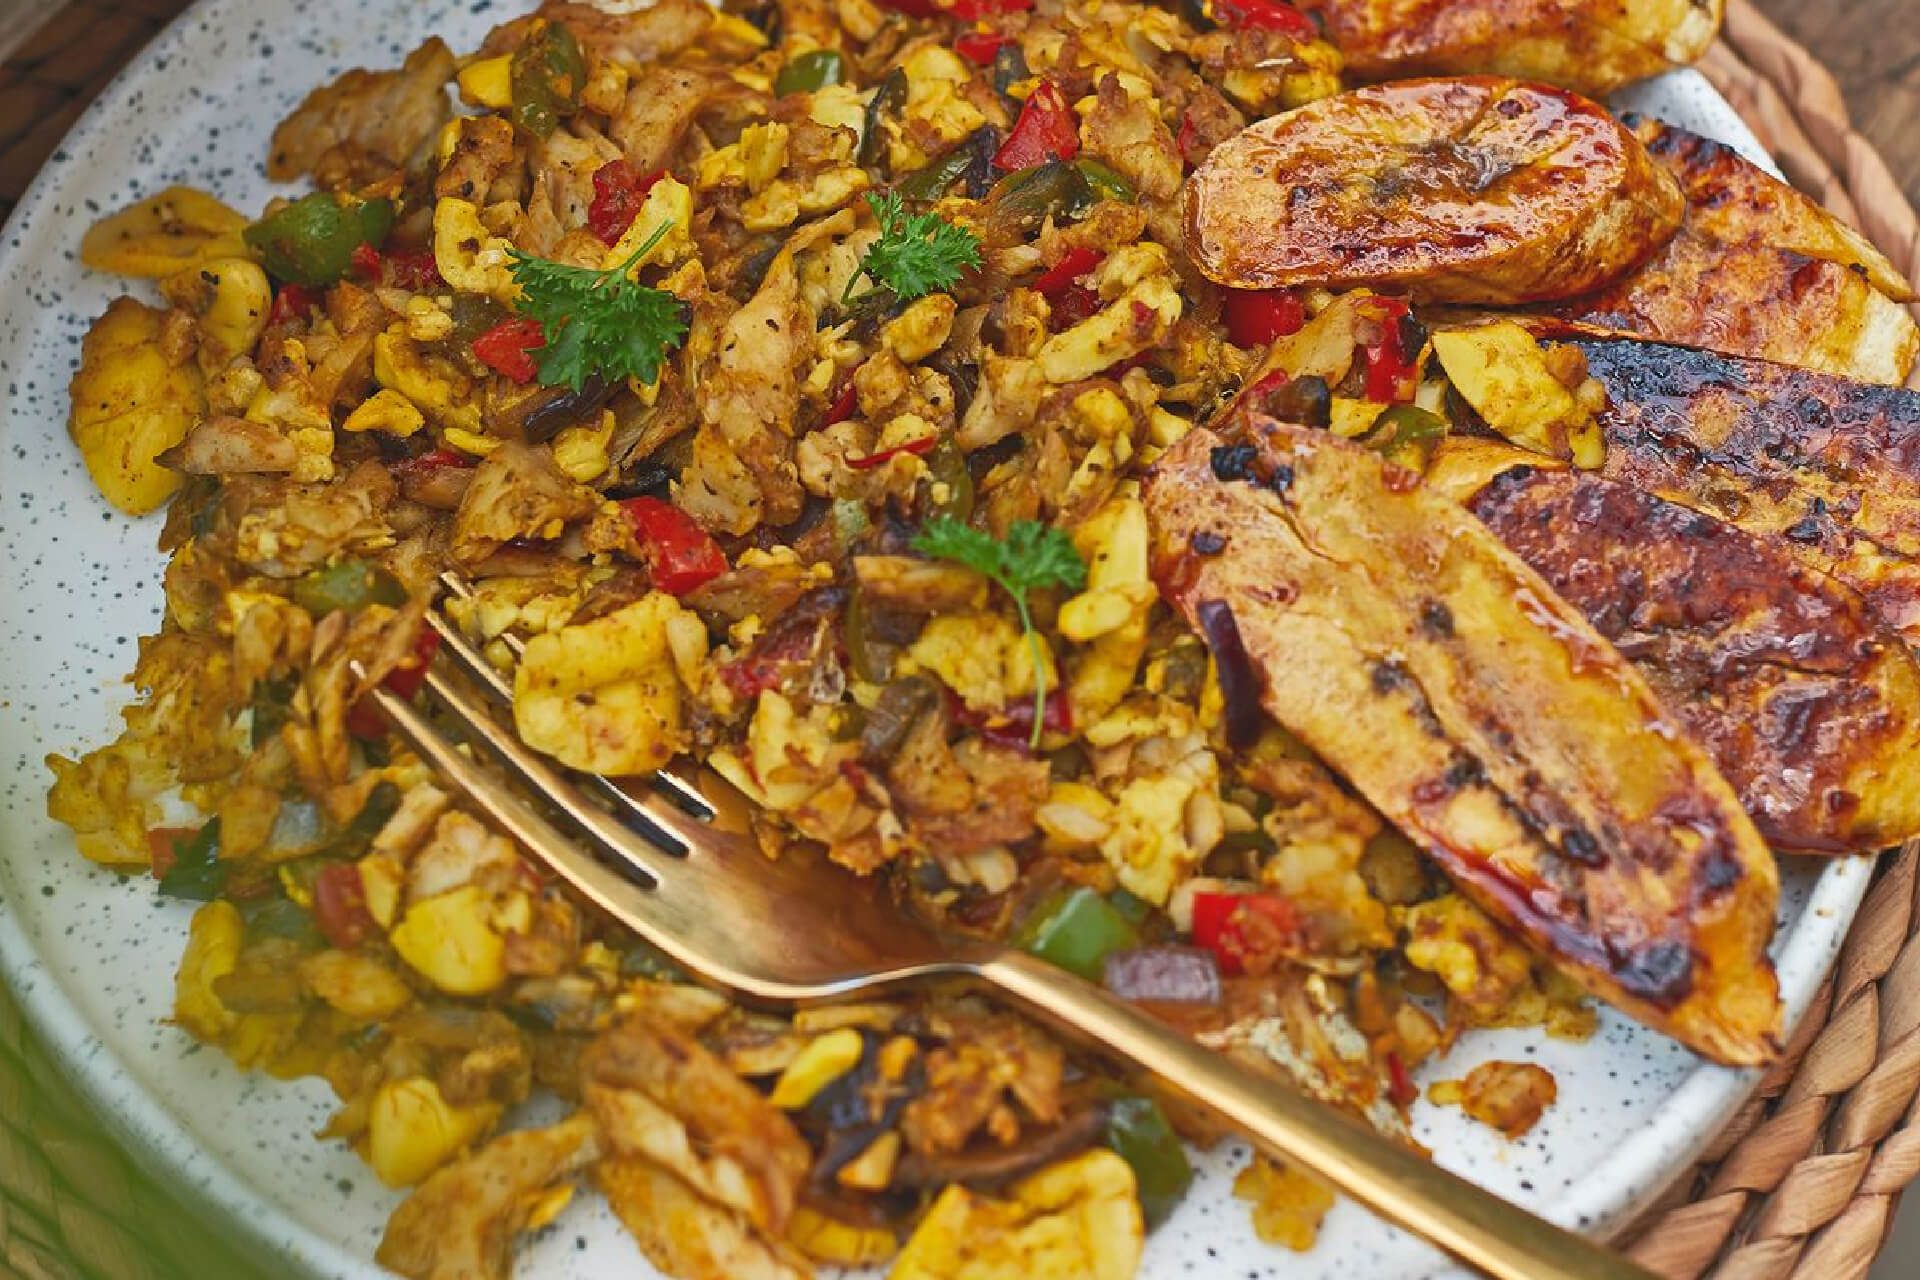 The Best Local Foods to Eat in Jamaica - Ackee and Saltfish